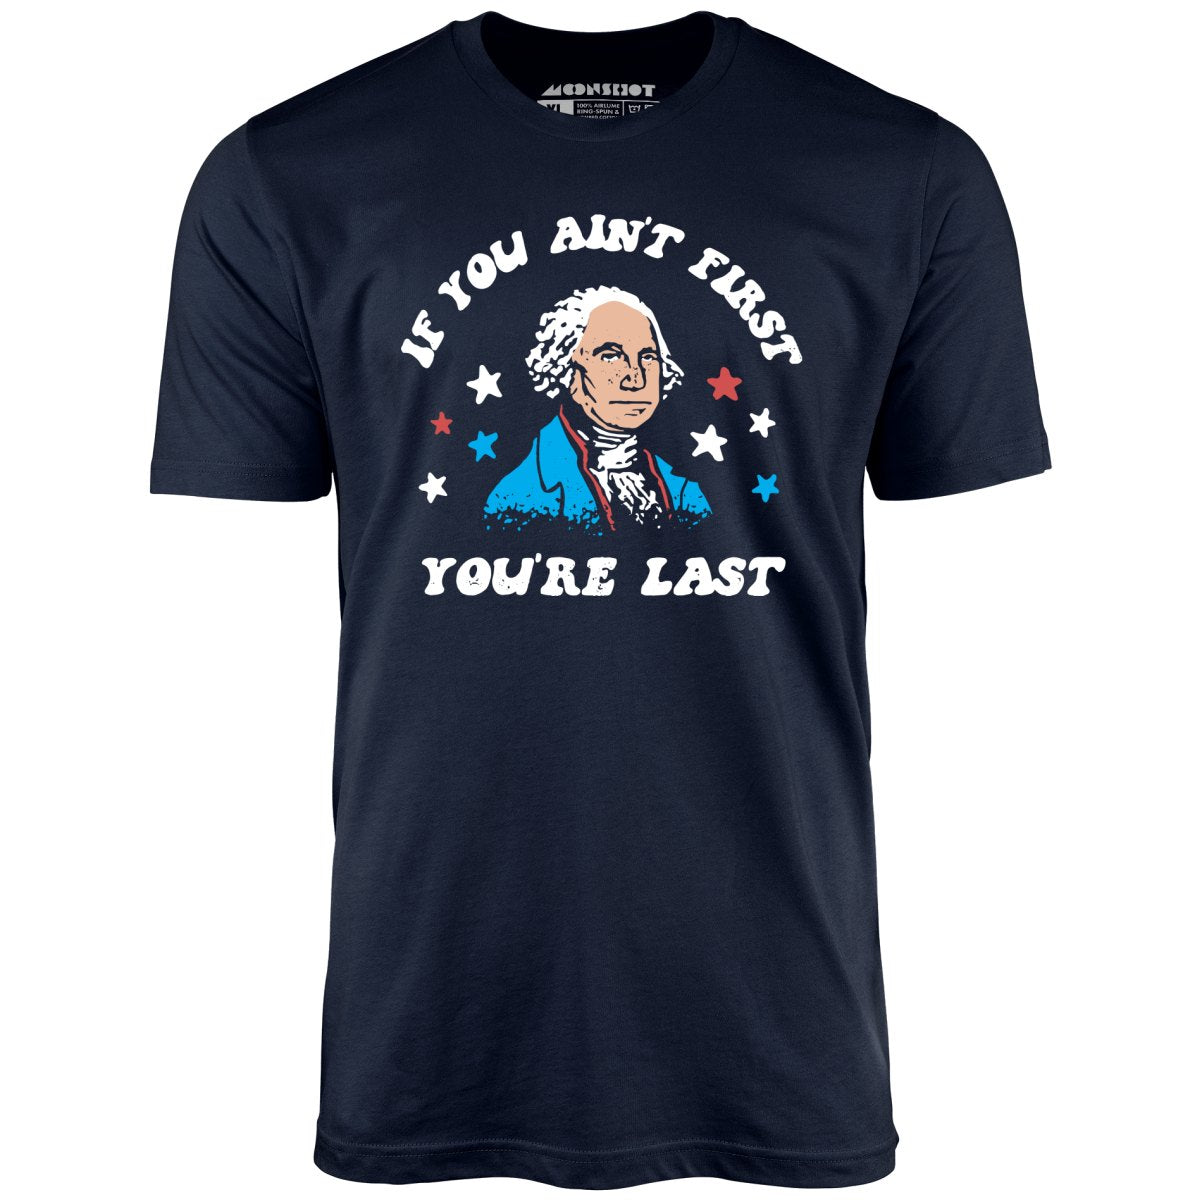 If You Ain't First You're Last - Unisex T-Shirt